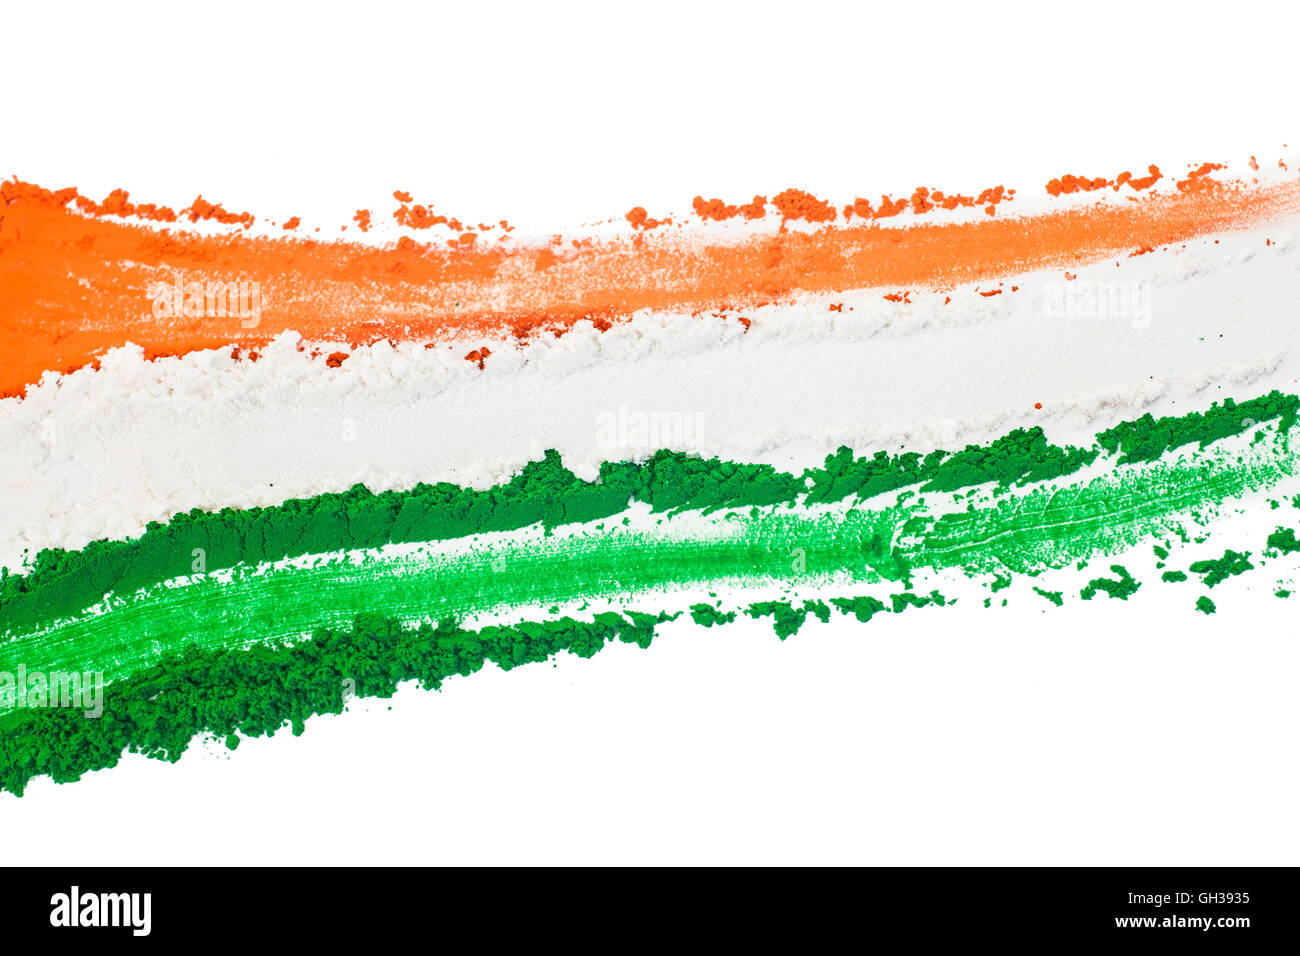 The tricolor of the Indian national flag painted with dye powder and isolated on white. Stock Photo